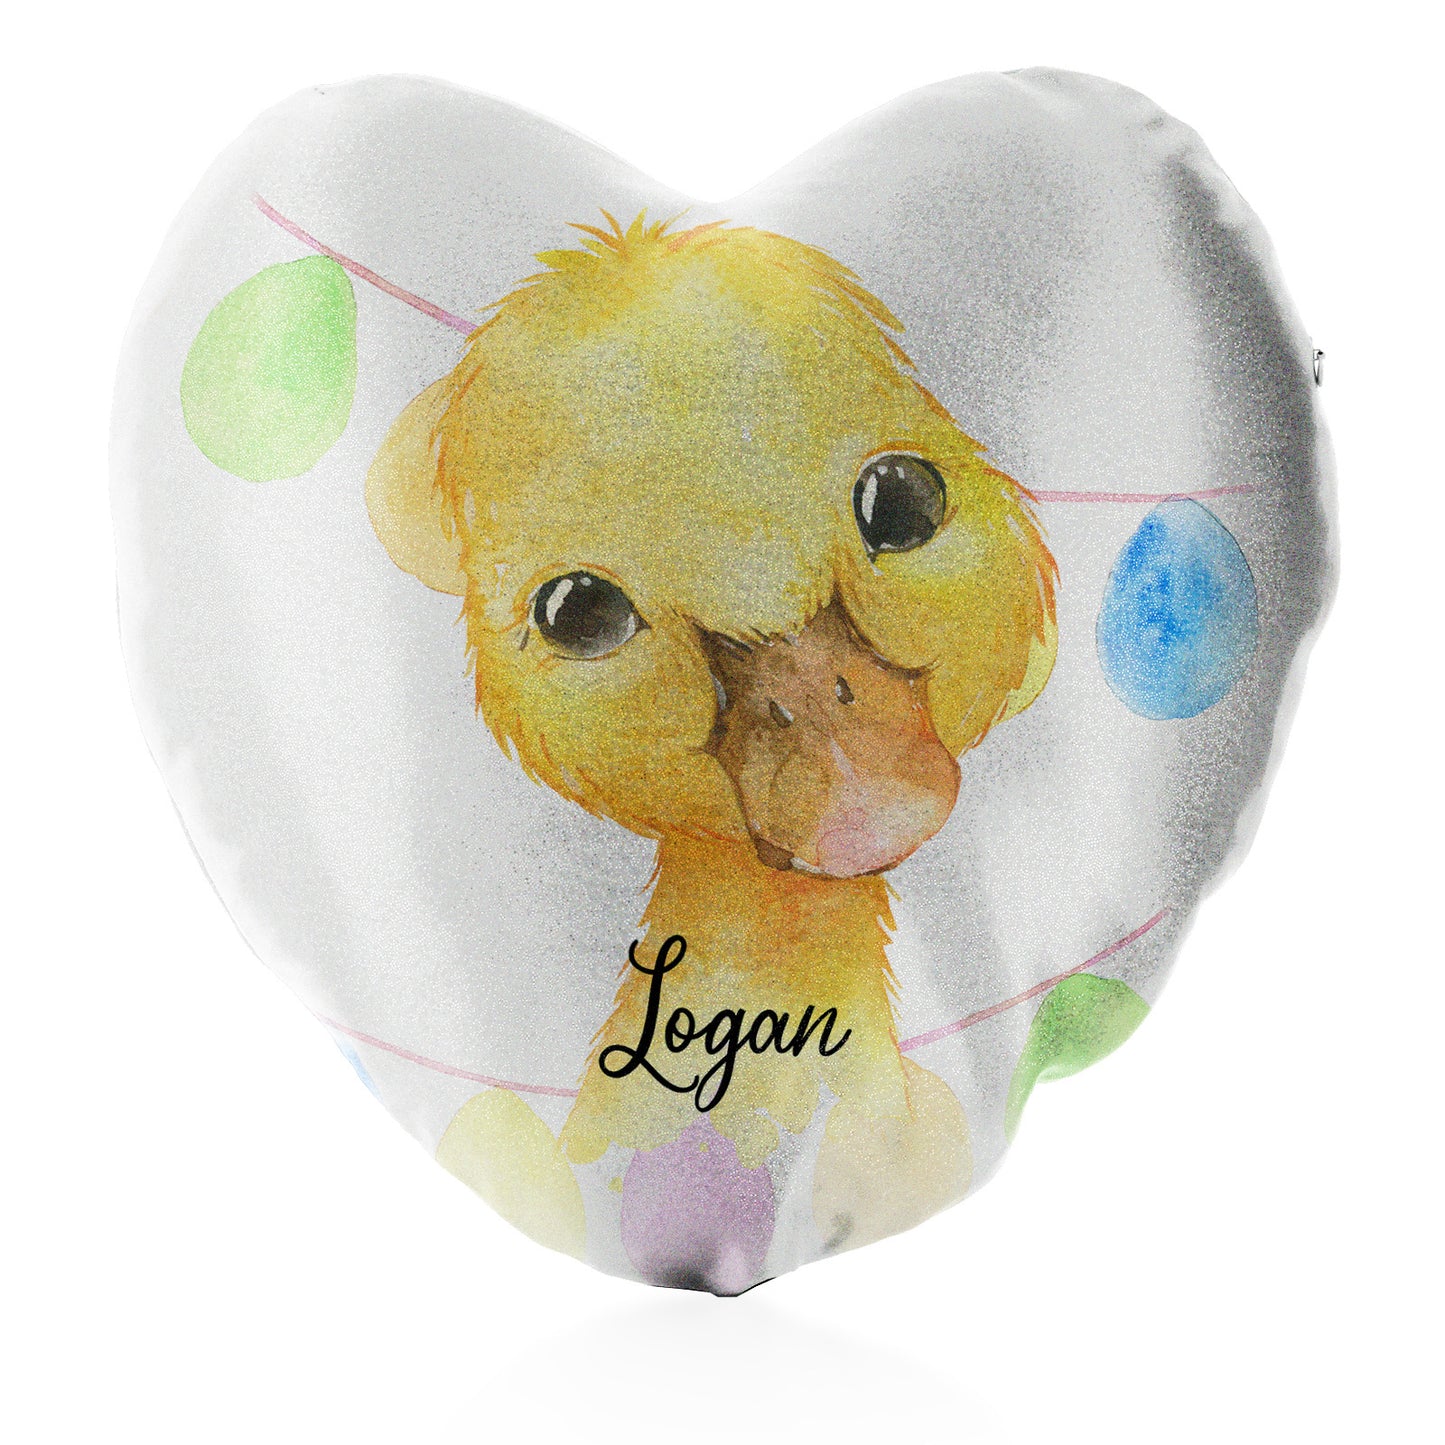 Personalised Glitter Heart Cushion with Yellow Duck Multicolour Buntin and Cute Text